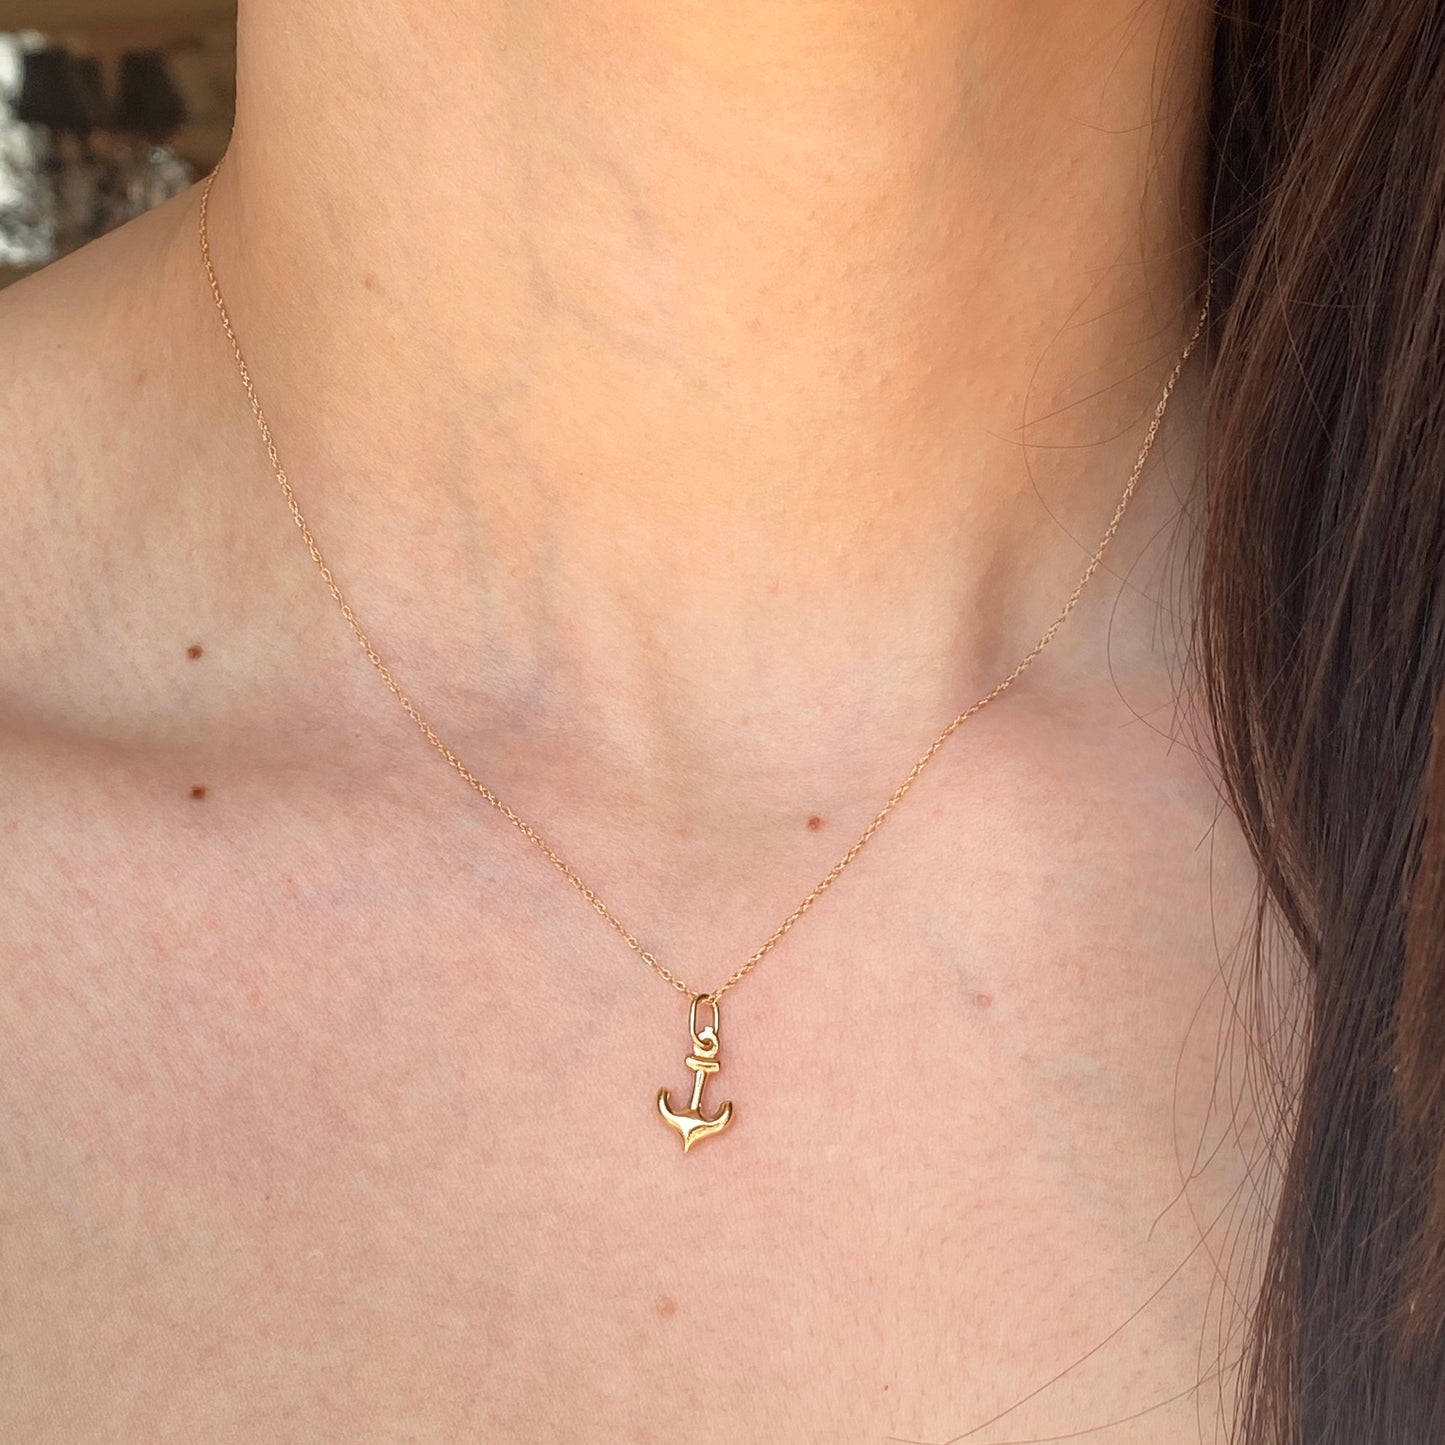 14KT Yellow Gold Mini 3D Anchor of Hope Pendant Chain Necklace, 14KT Yellow Gold Mini 3D Anchor of Hope Pendant Chain Necklace - Legacy Saint Jewelry